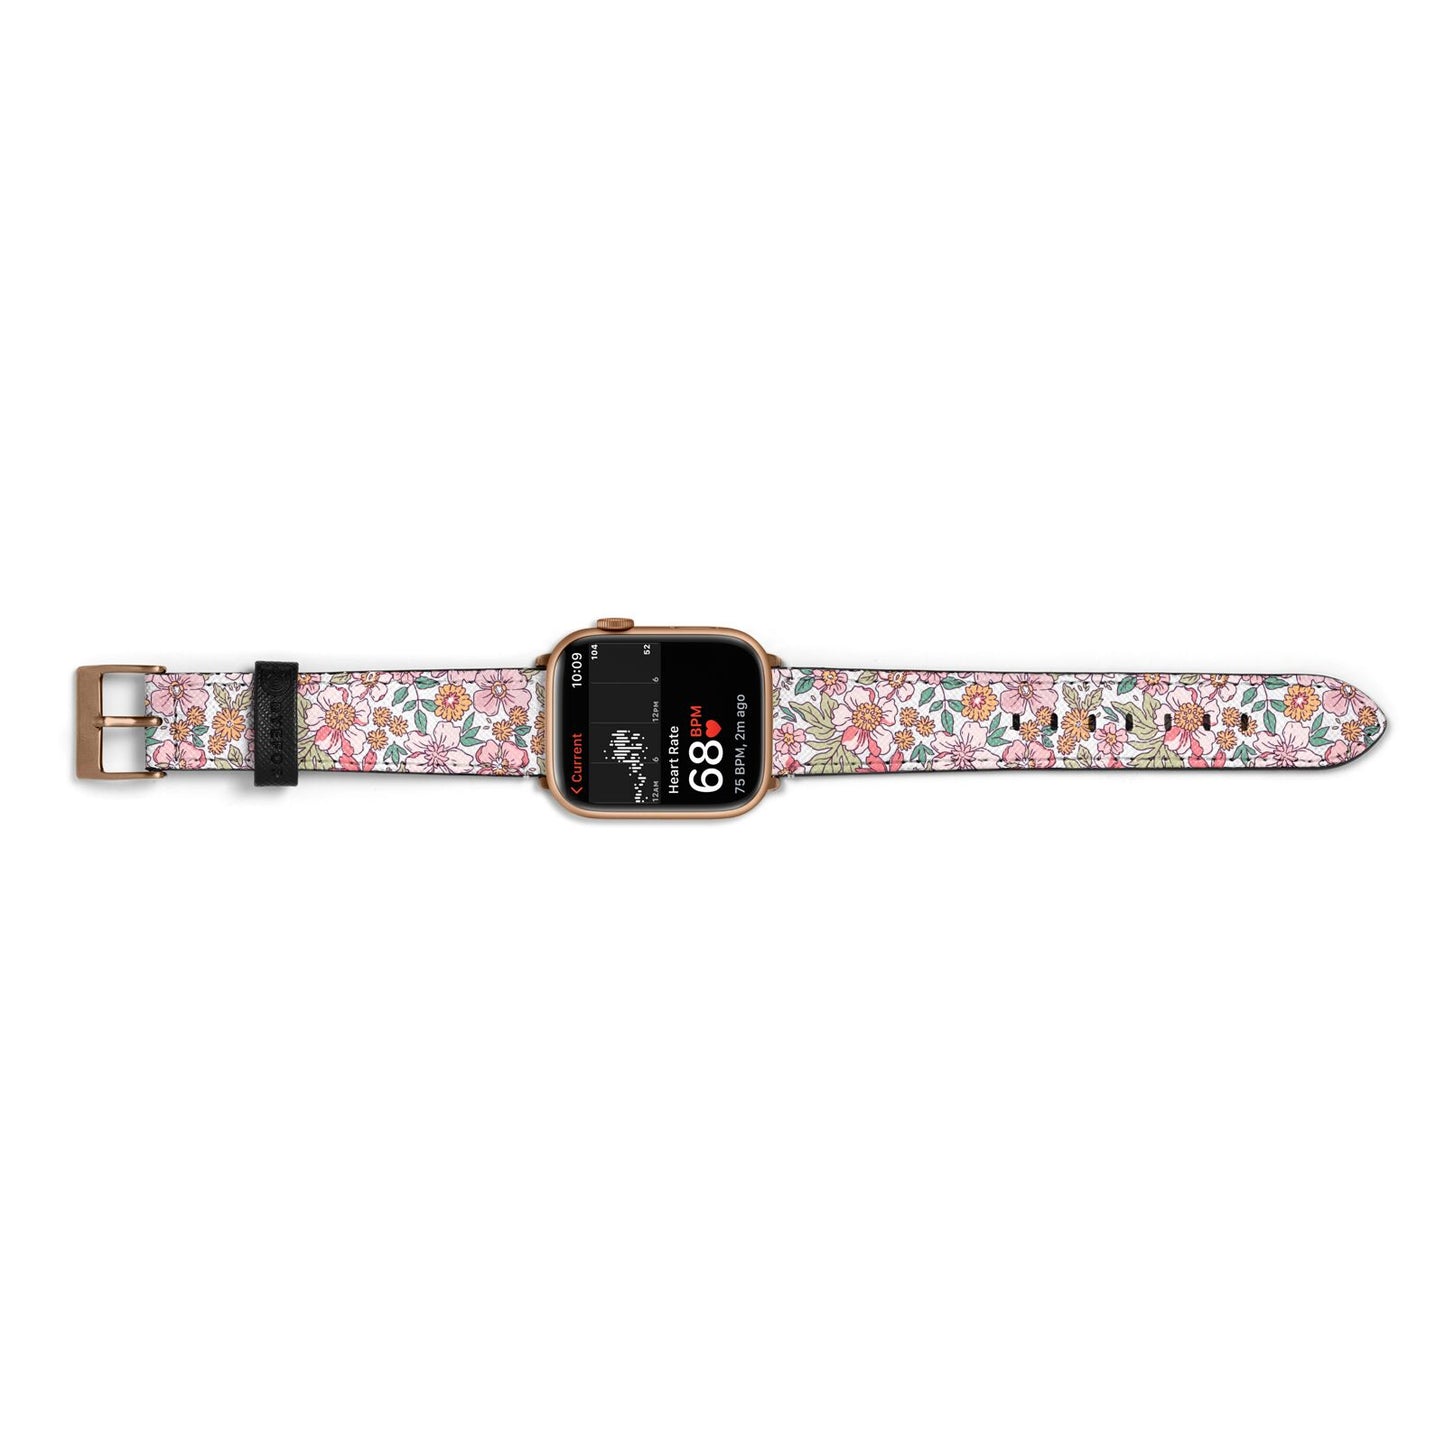 Small Floral Pattern Apple Watch Strap Size 38mm Landscape Image Gold Hardware